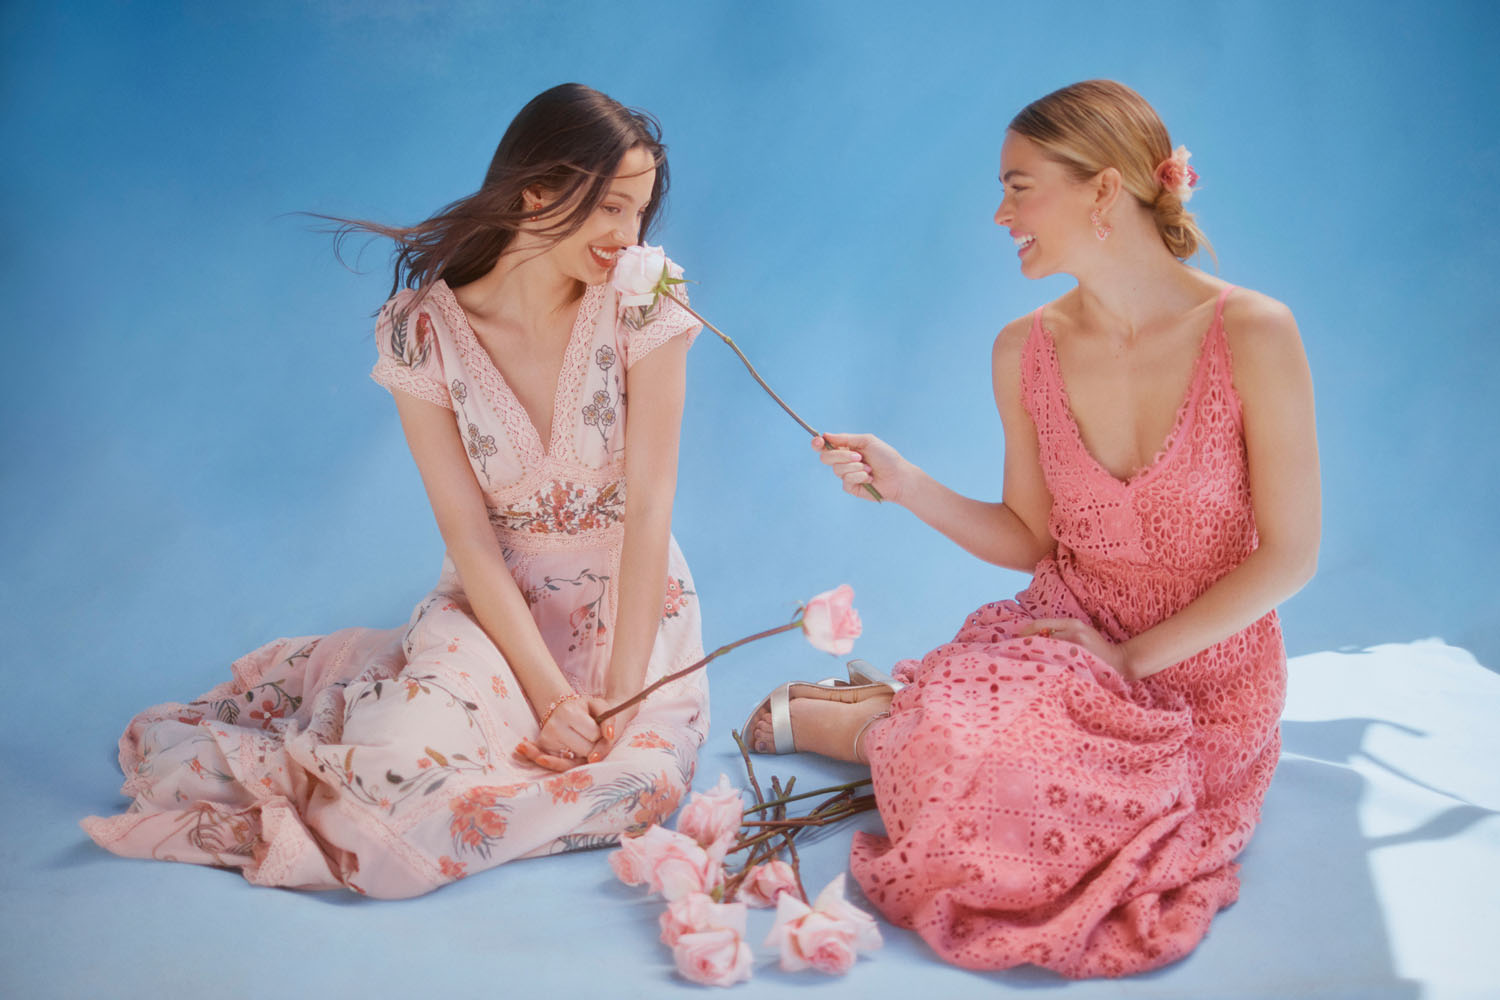 BHLDN x Free People Capsule Collection pink bridesmaids